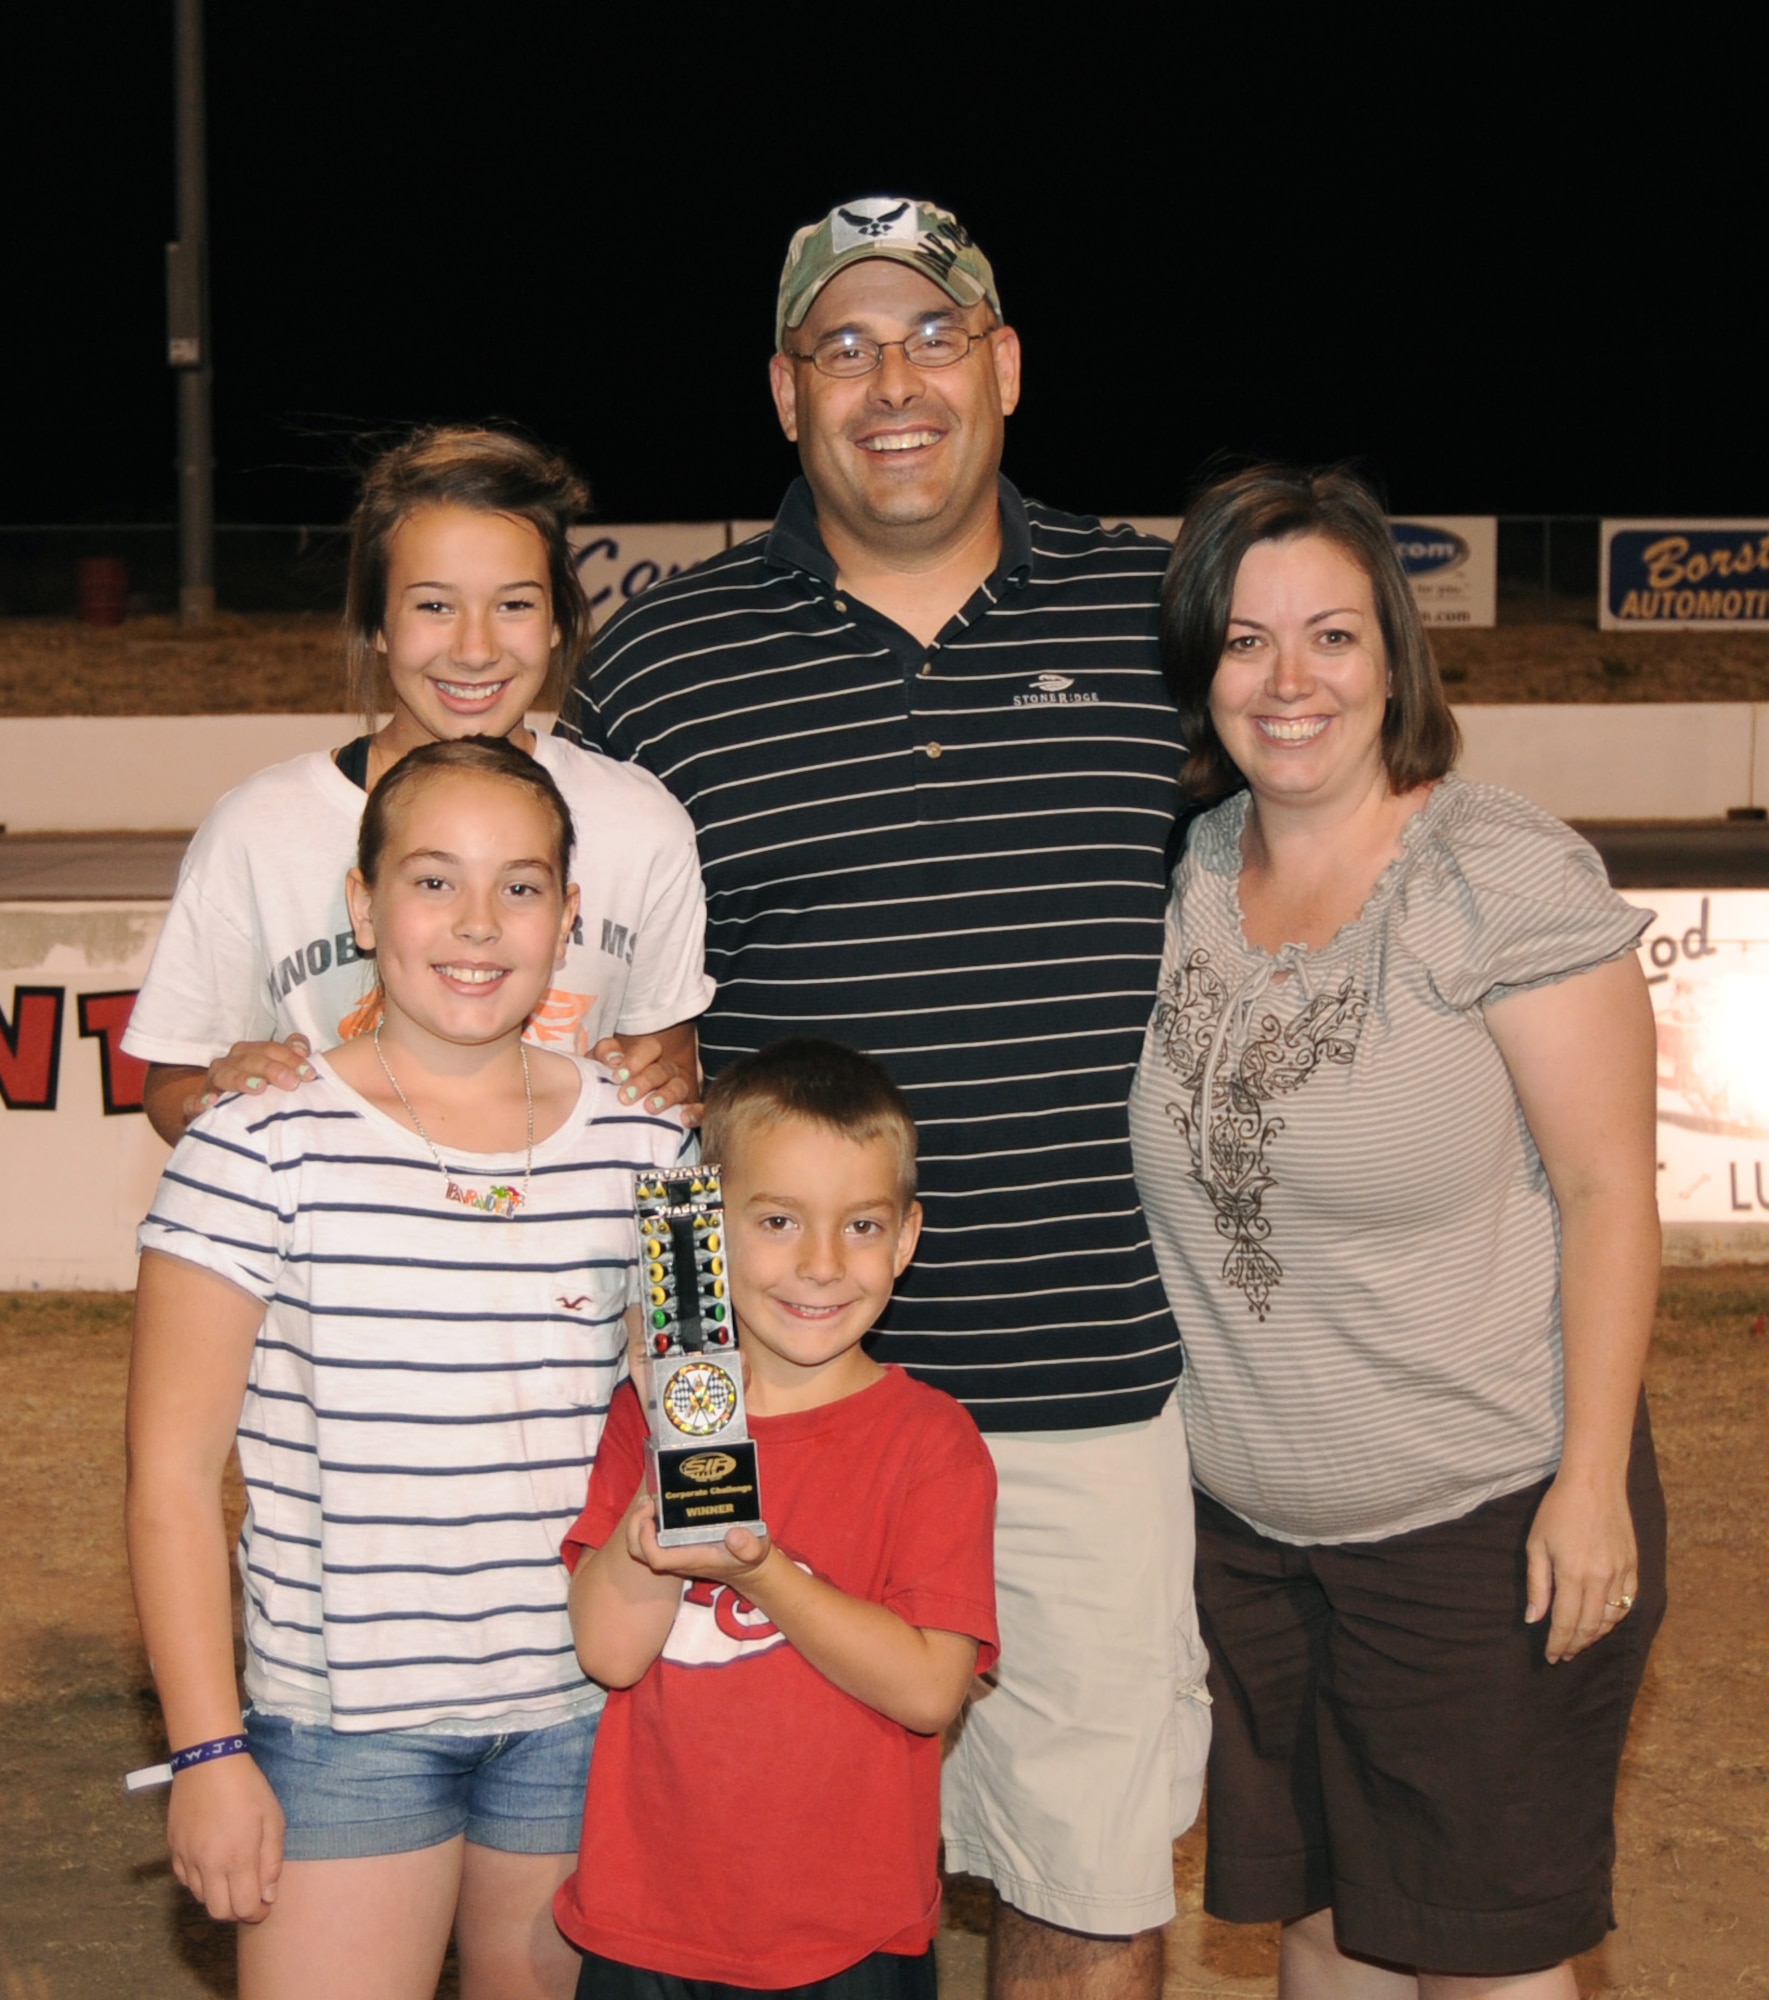 U.S. Air Force Lt. Col. Trace Steyaert, 355th Logistics Readiness Squadron commander, poses with his family after defeating 49 other racers to win the Southwestern International Raceway drag race tournament May 30. Identical cars were used, so the skill of the driver was the only factor in winning the race. (U.S. Air Force photo by Airman 1st Class Michael Washburn/Released)